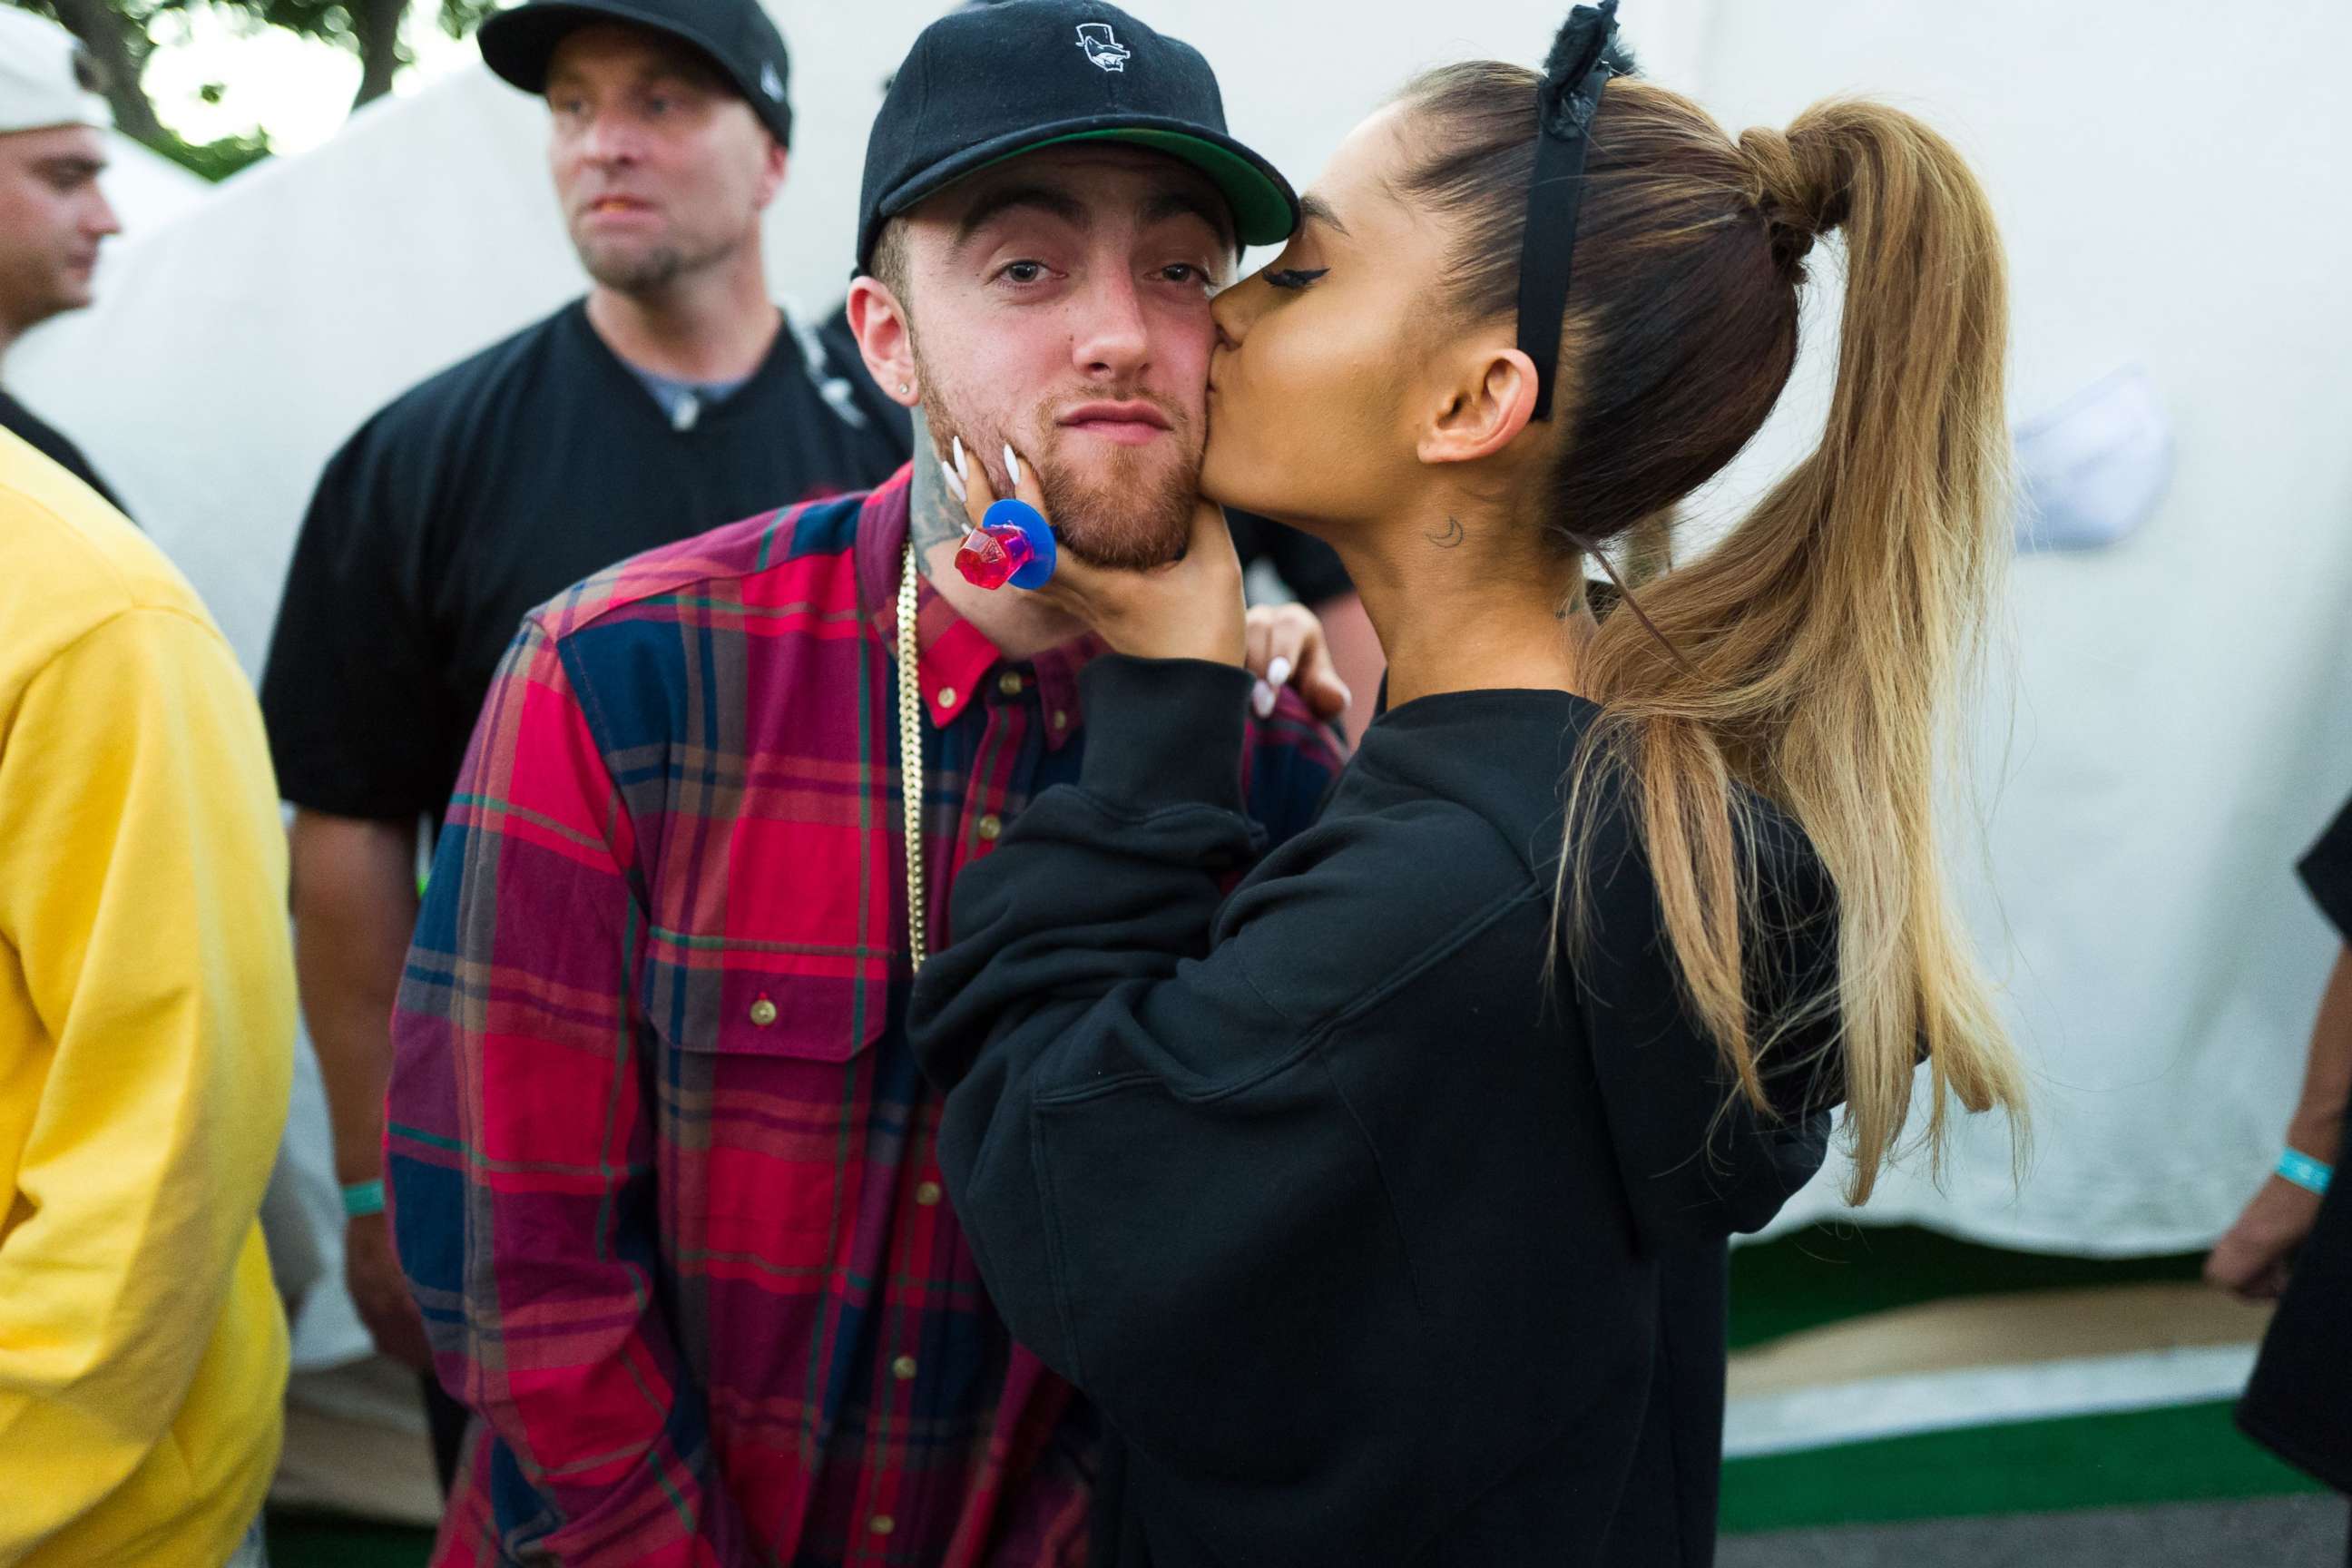 PHOTO: Ariana Grande kisses Mac Miller at an event in Los Angeles, Sept. 25, 2016.